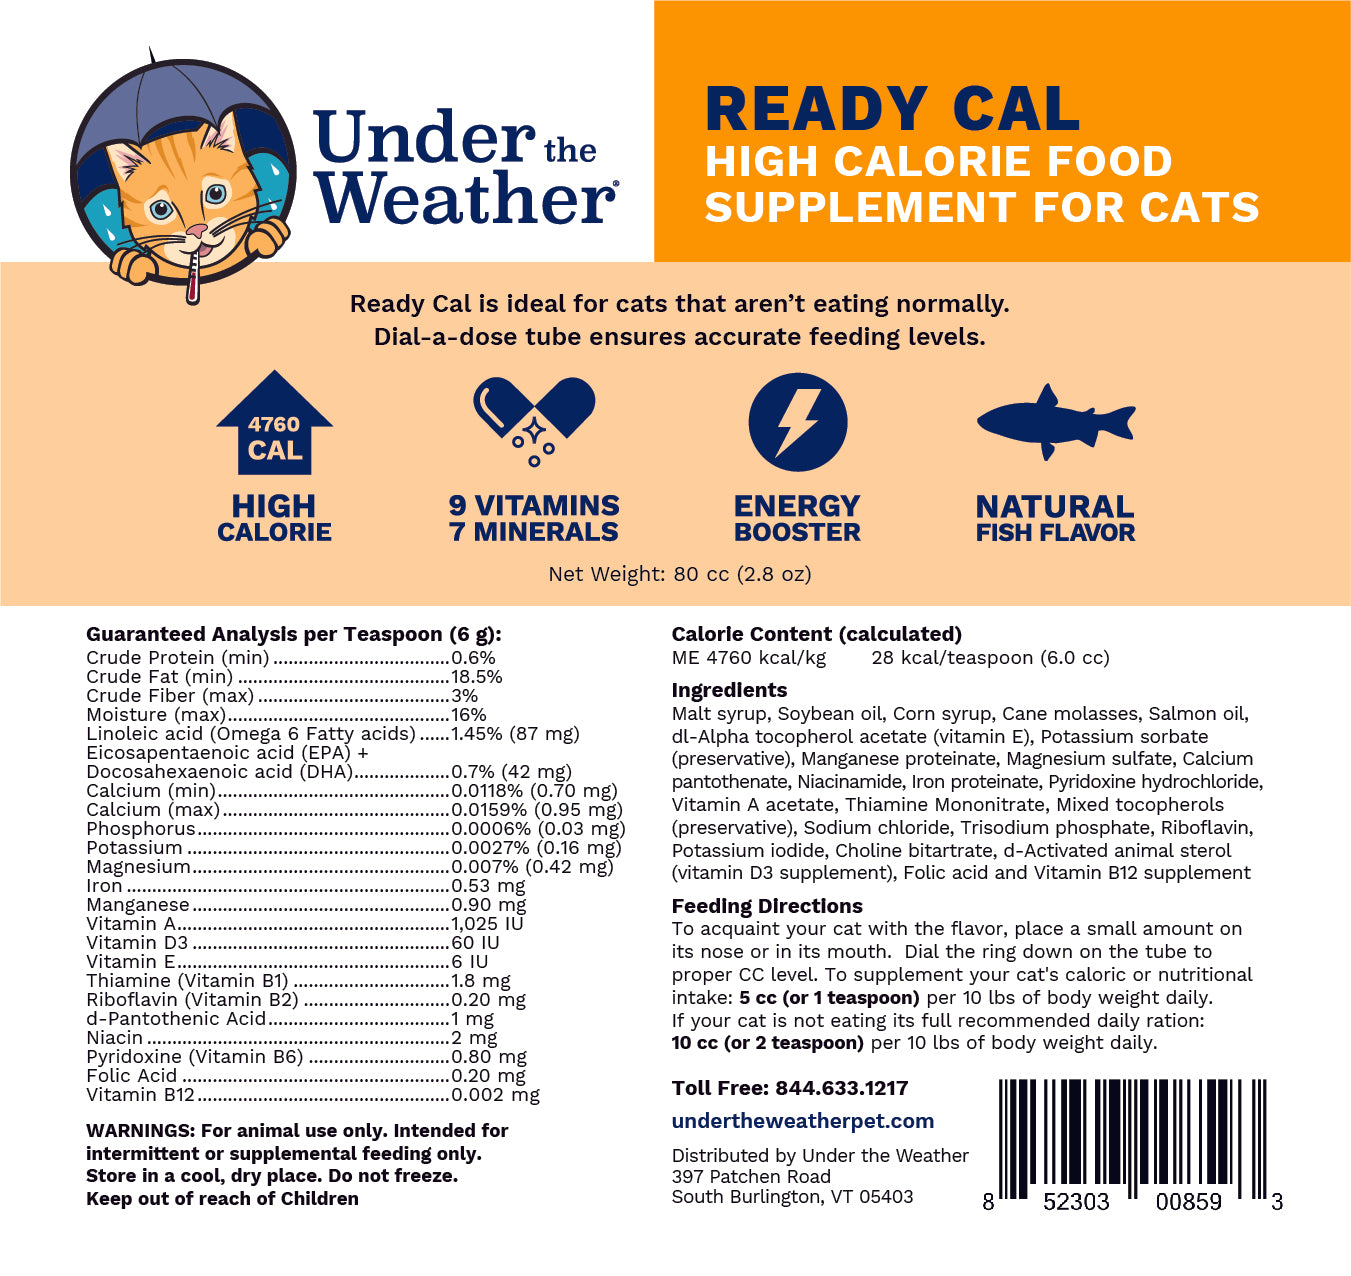 Ready Cal High-Calorie Supplement For Cats - 80cc - 2 Pack